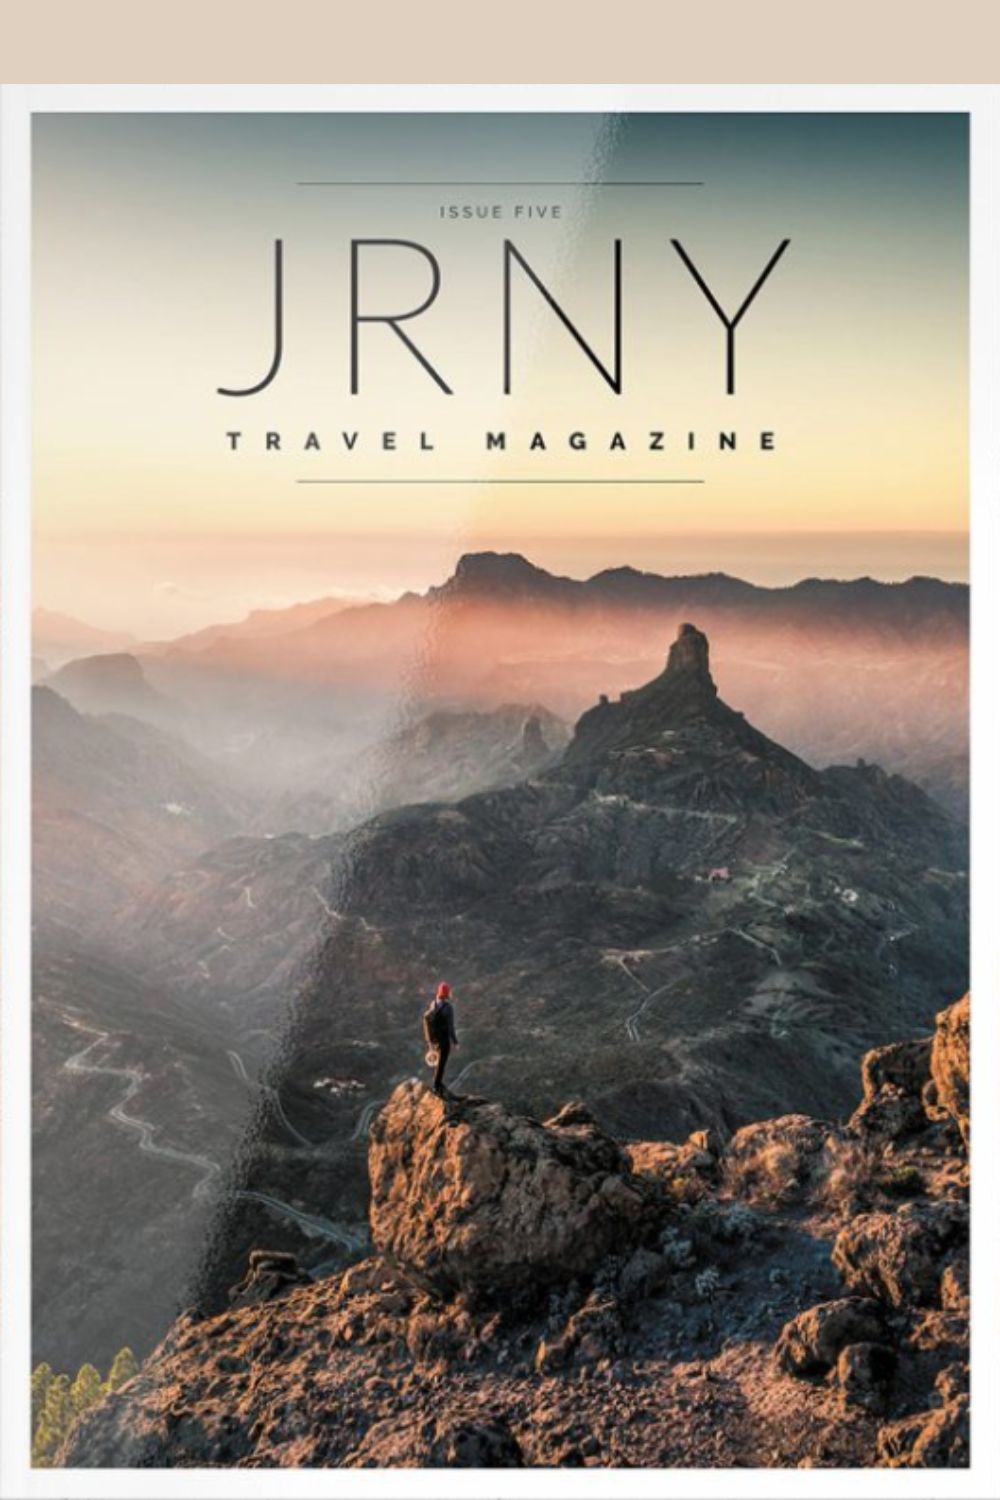 JRNY Magazine Issue 5 cover